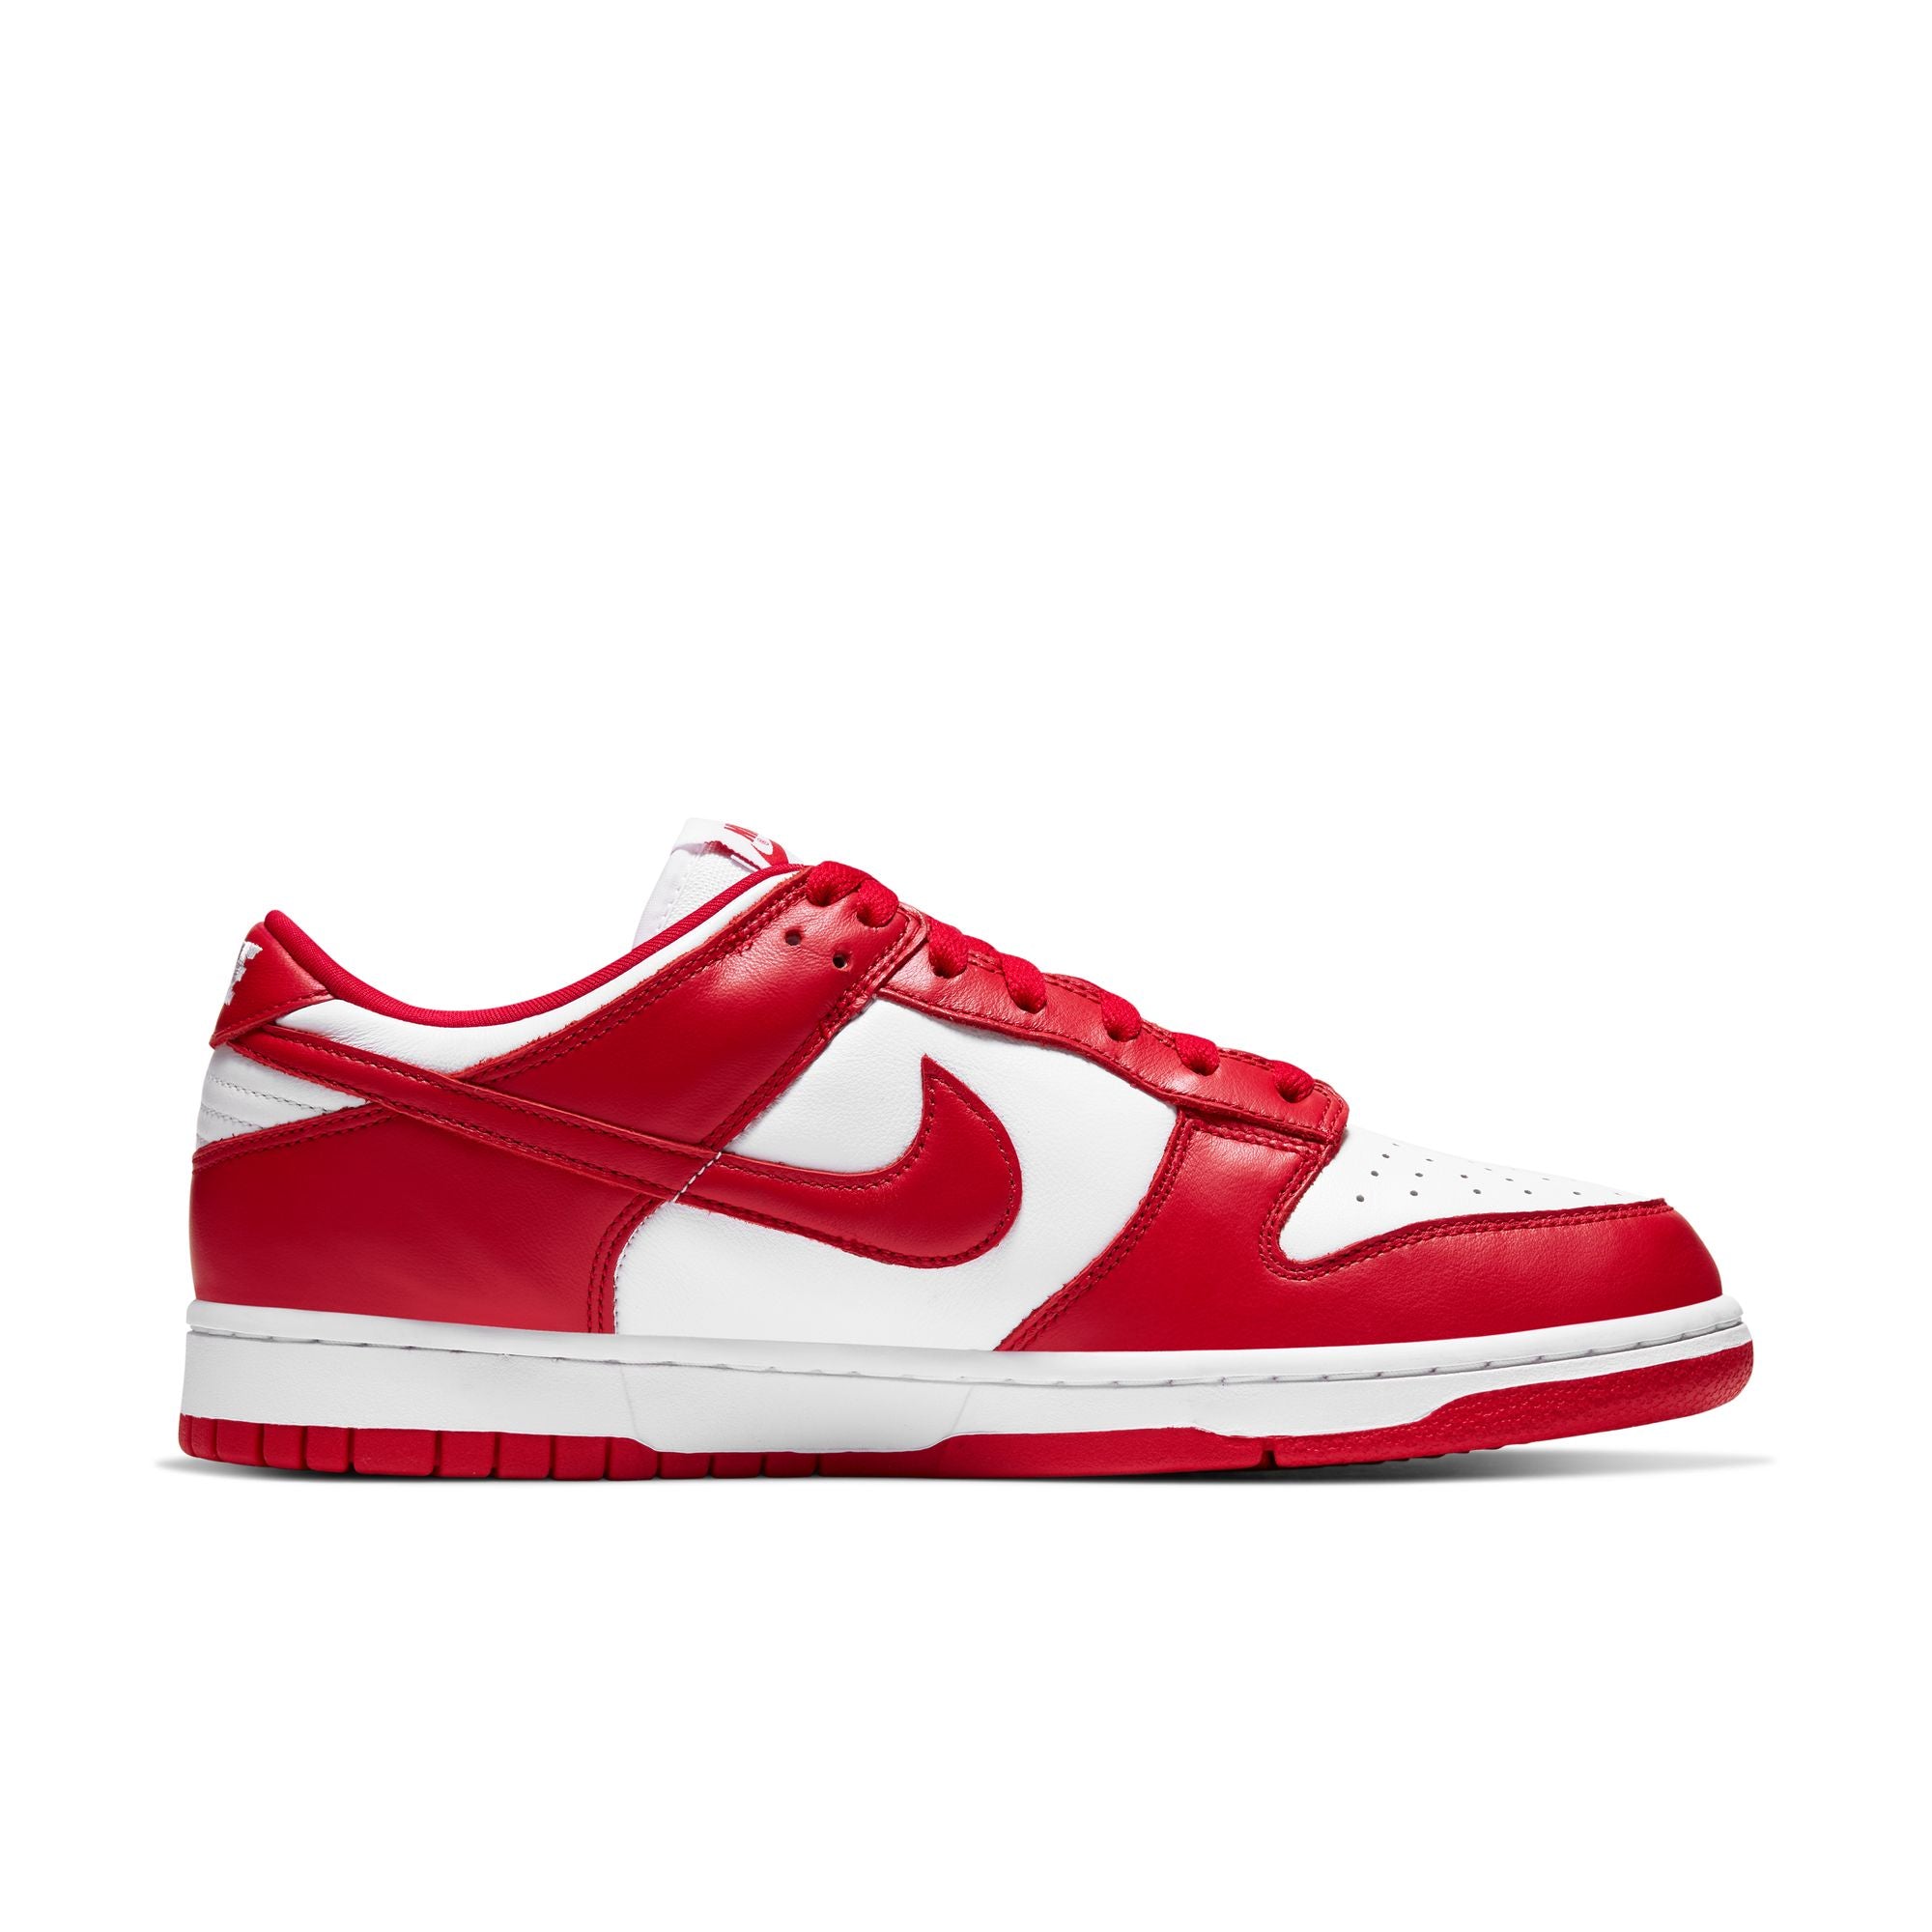 NIKE DUNK LOW SP "UNIVERSITY RED"